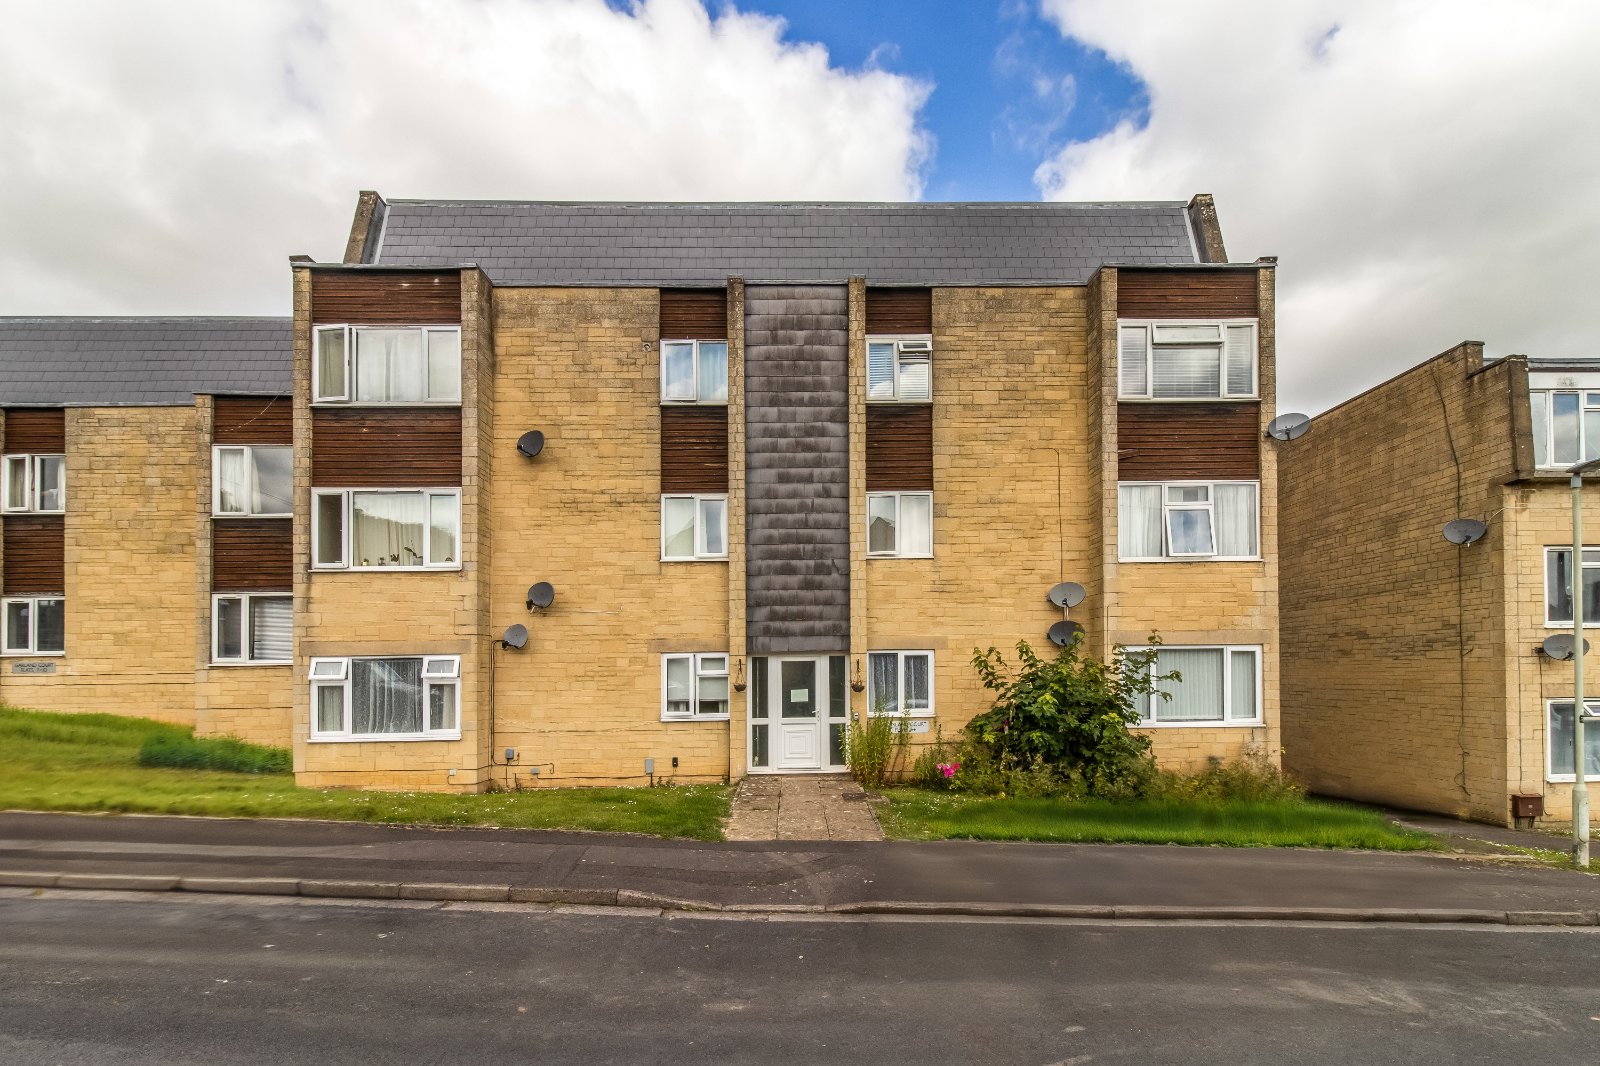 Meadow Road, Cirencester, Gloucestershire, GL7